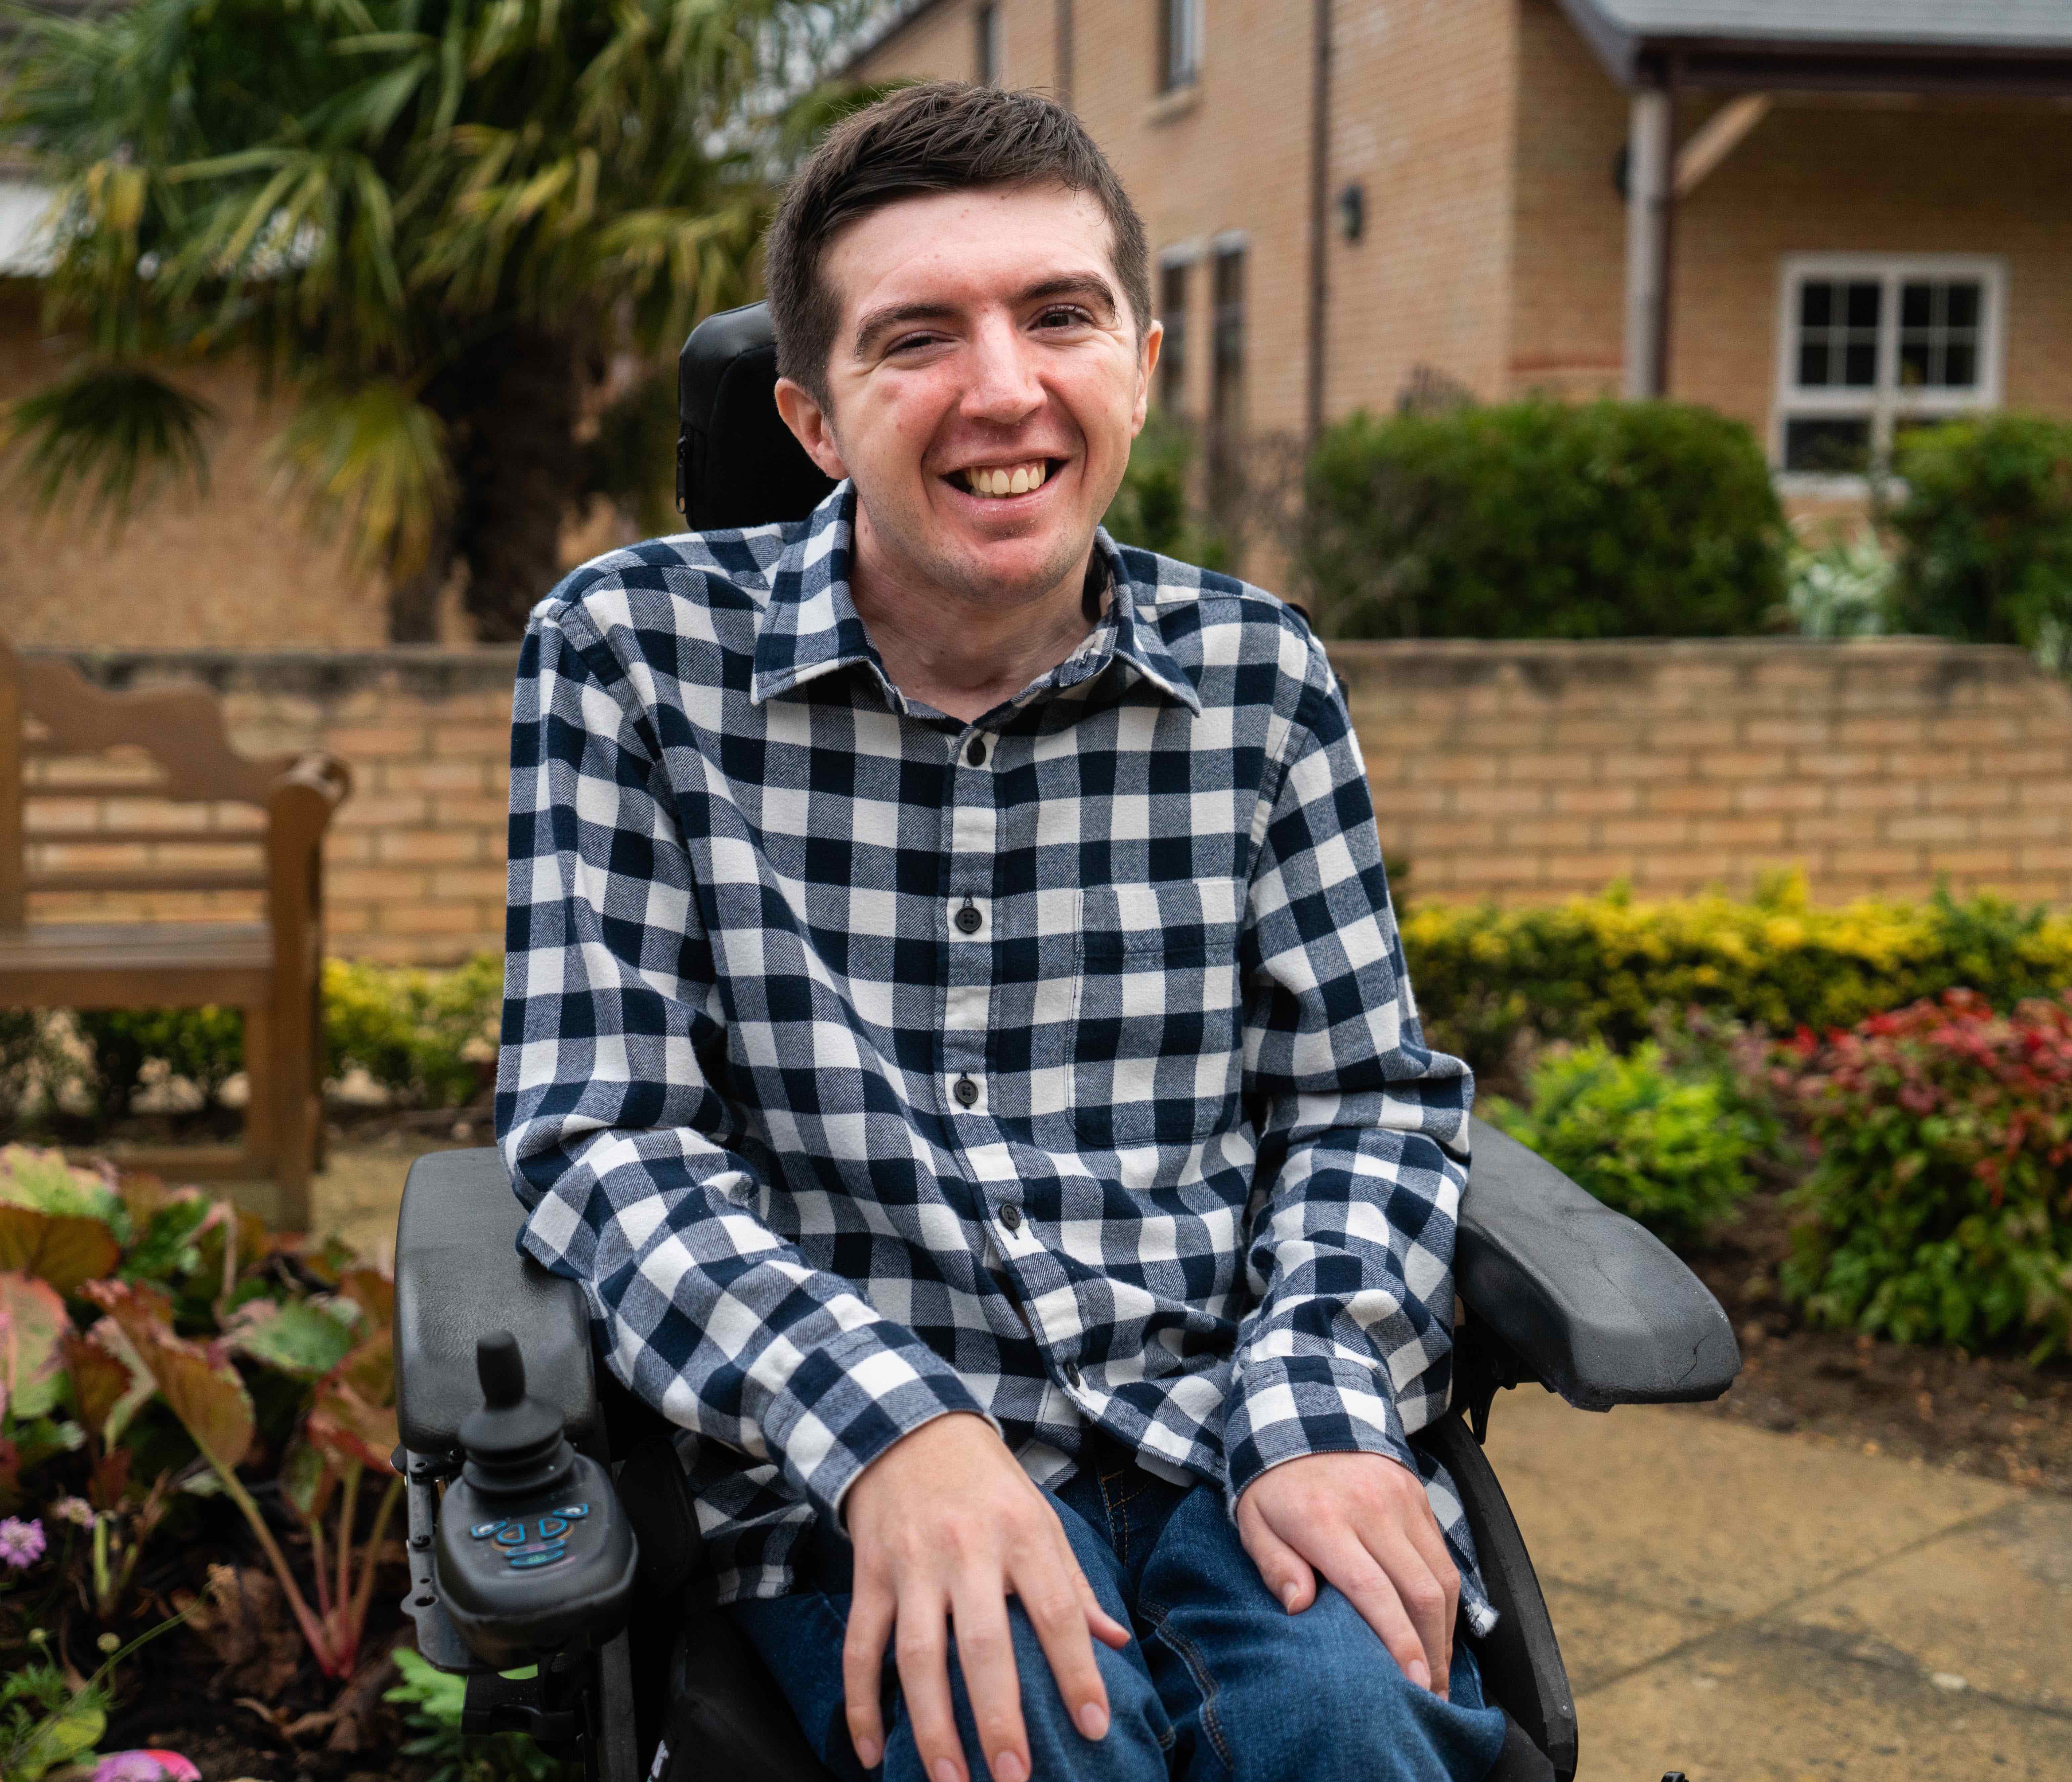 Community radio presenter Joshua Donlon, 26, has returned to the airwaves after rehabilitation to find his voice again, after a brain tumour affected his speech. (Askham Rehab/ PA)